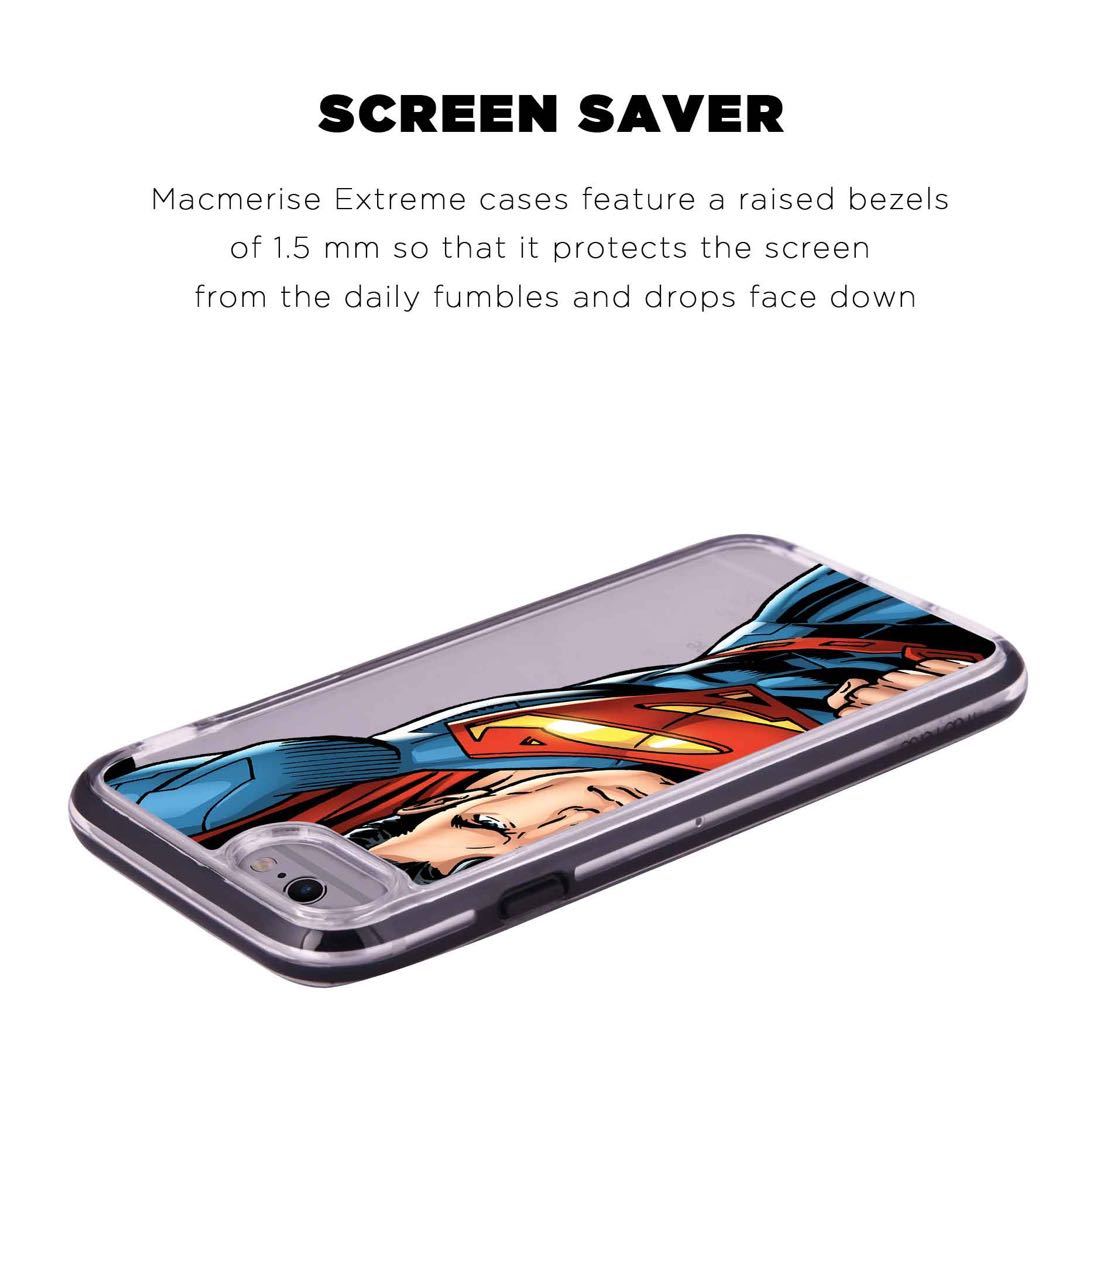 Speed it like Superman - Extreme Phone Case for iPhone 6S Plus